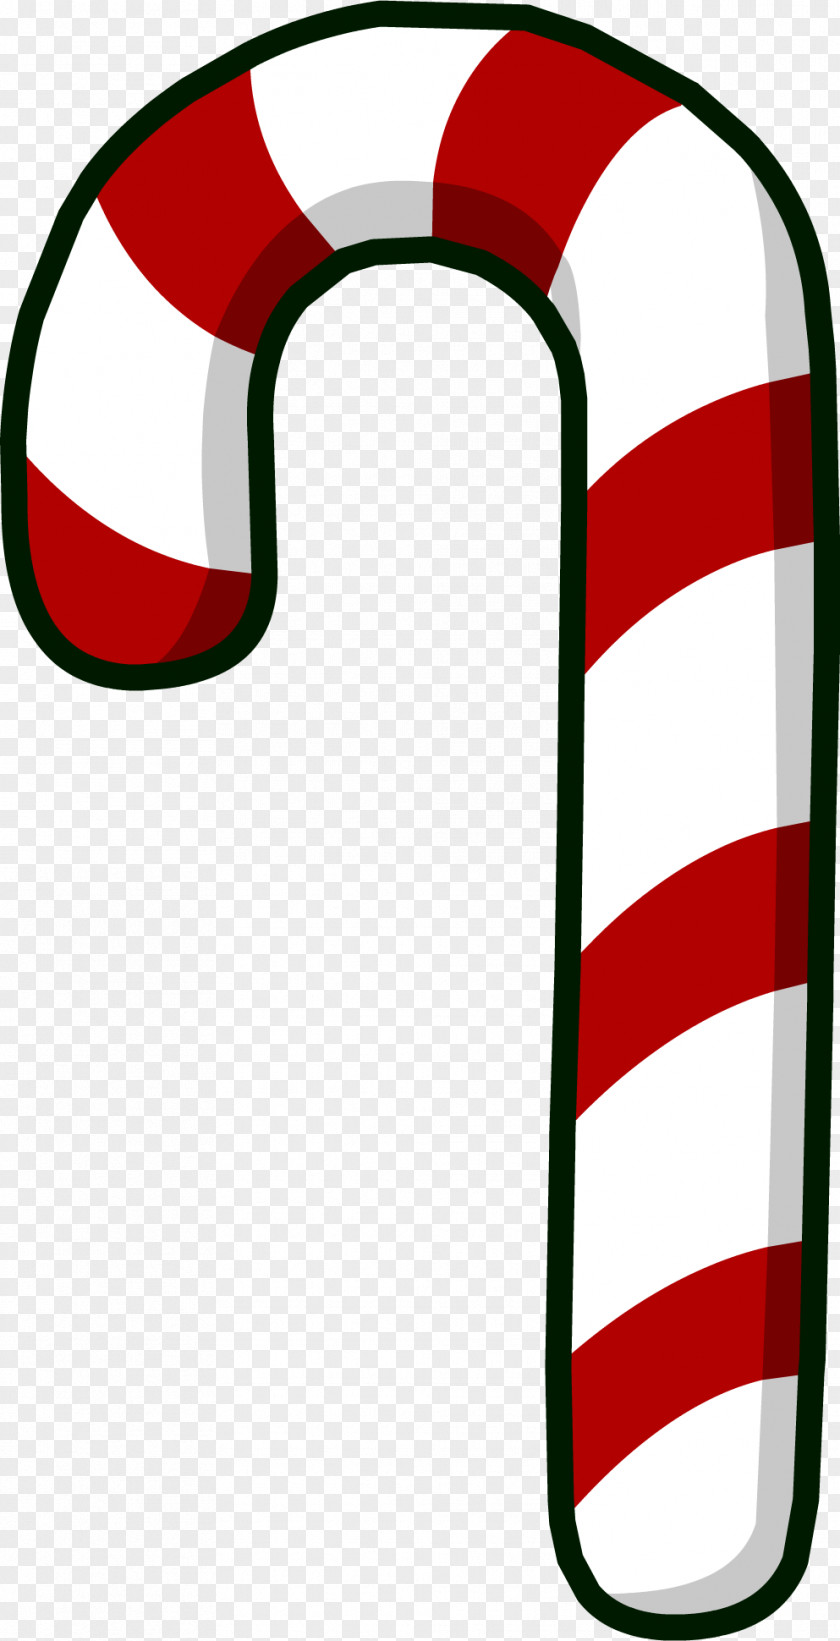 Pepermint Candy Cane Stick Christmas Clip Art PNG